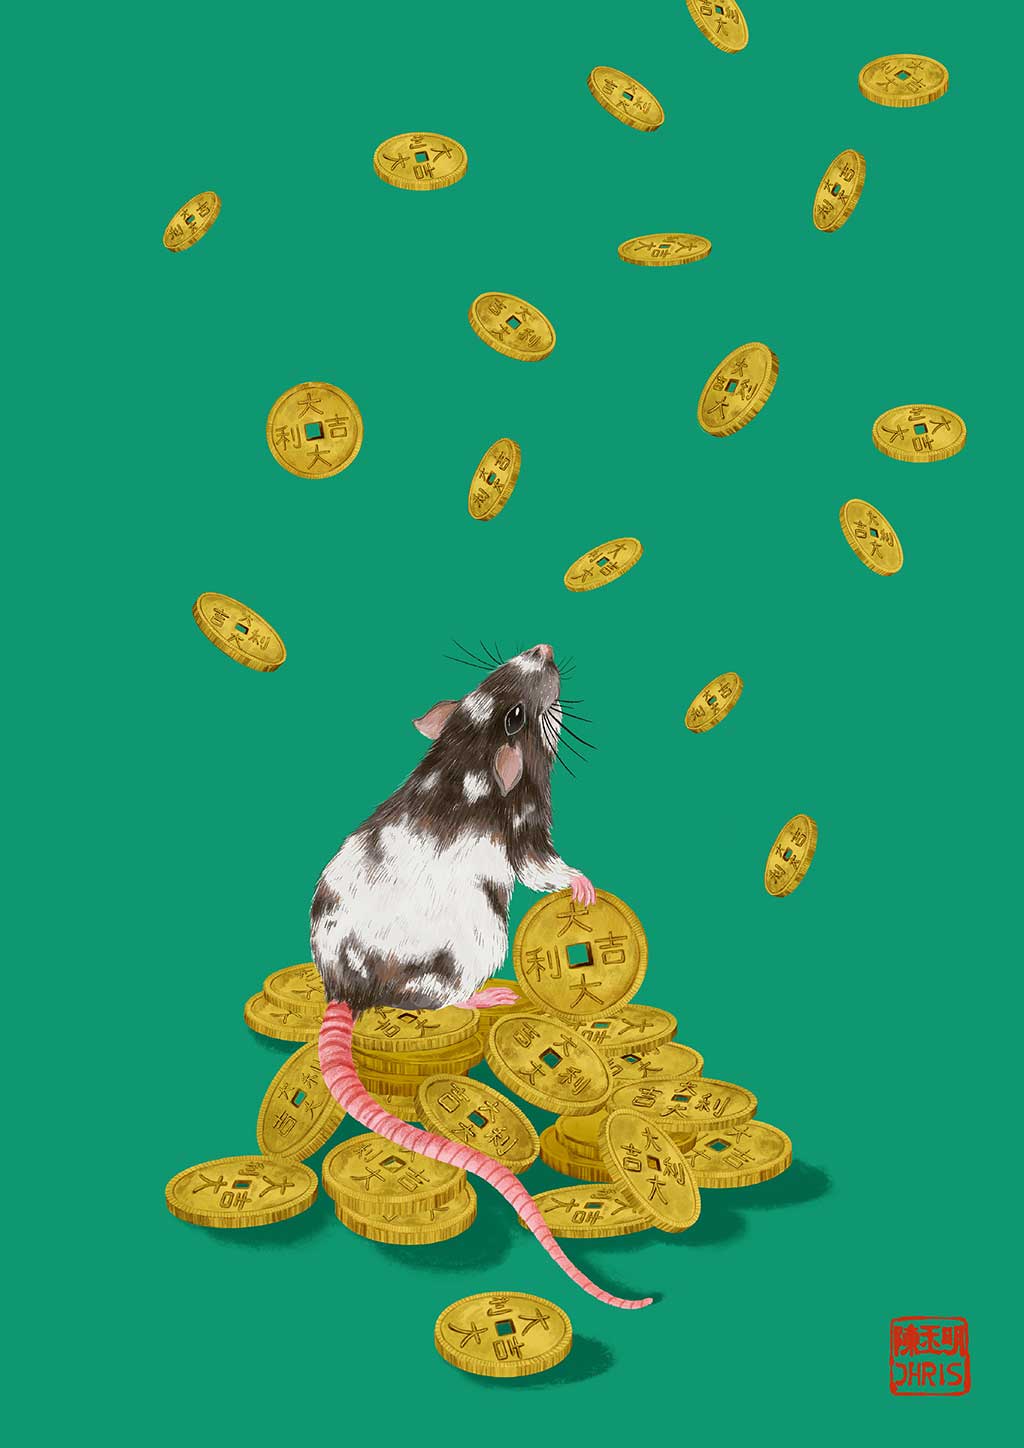 Lucky Coins was created by Australian Chinese Artist Chris Chun to celebrate 2020 Year of the Rat. May everyone be blessed with good fortune!